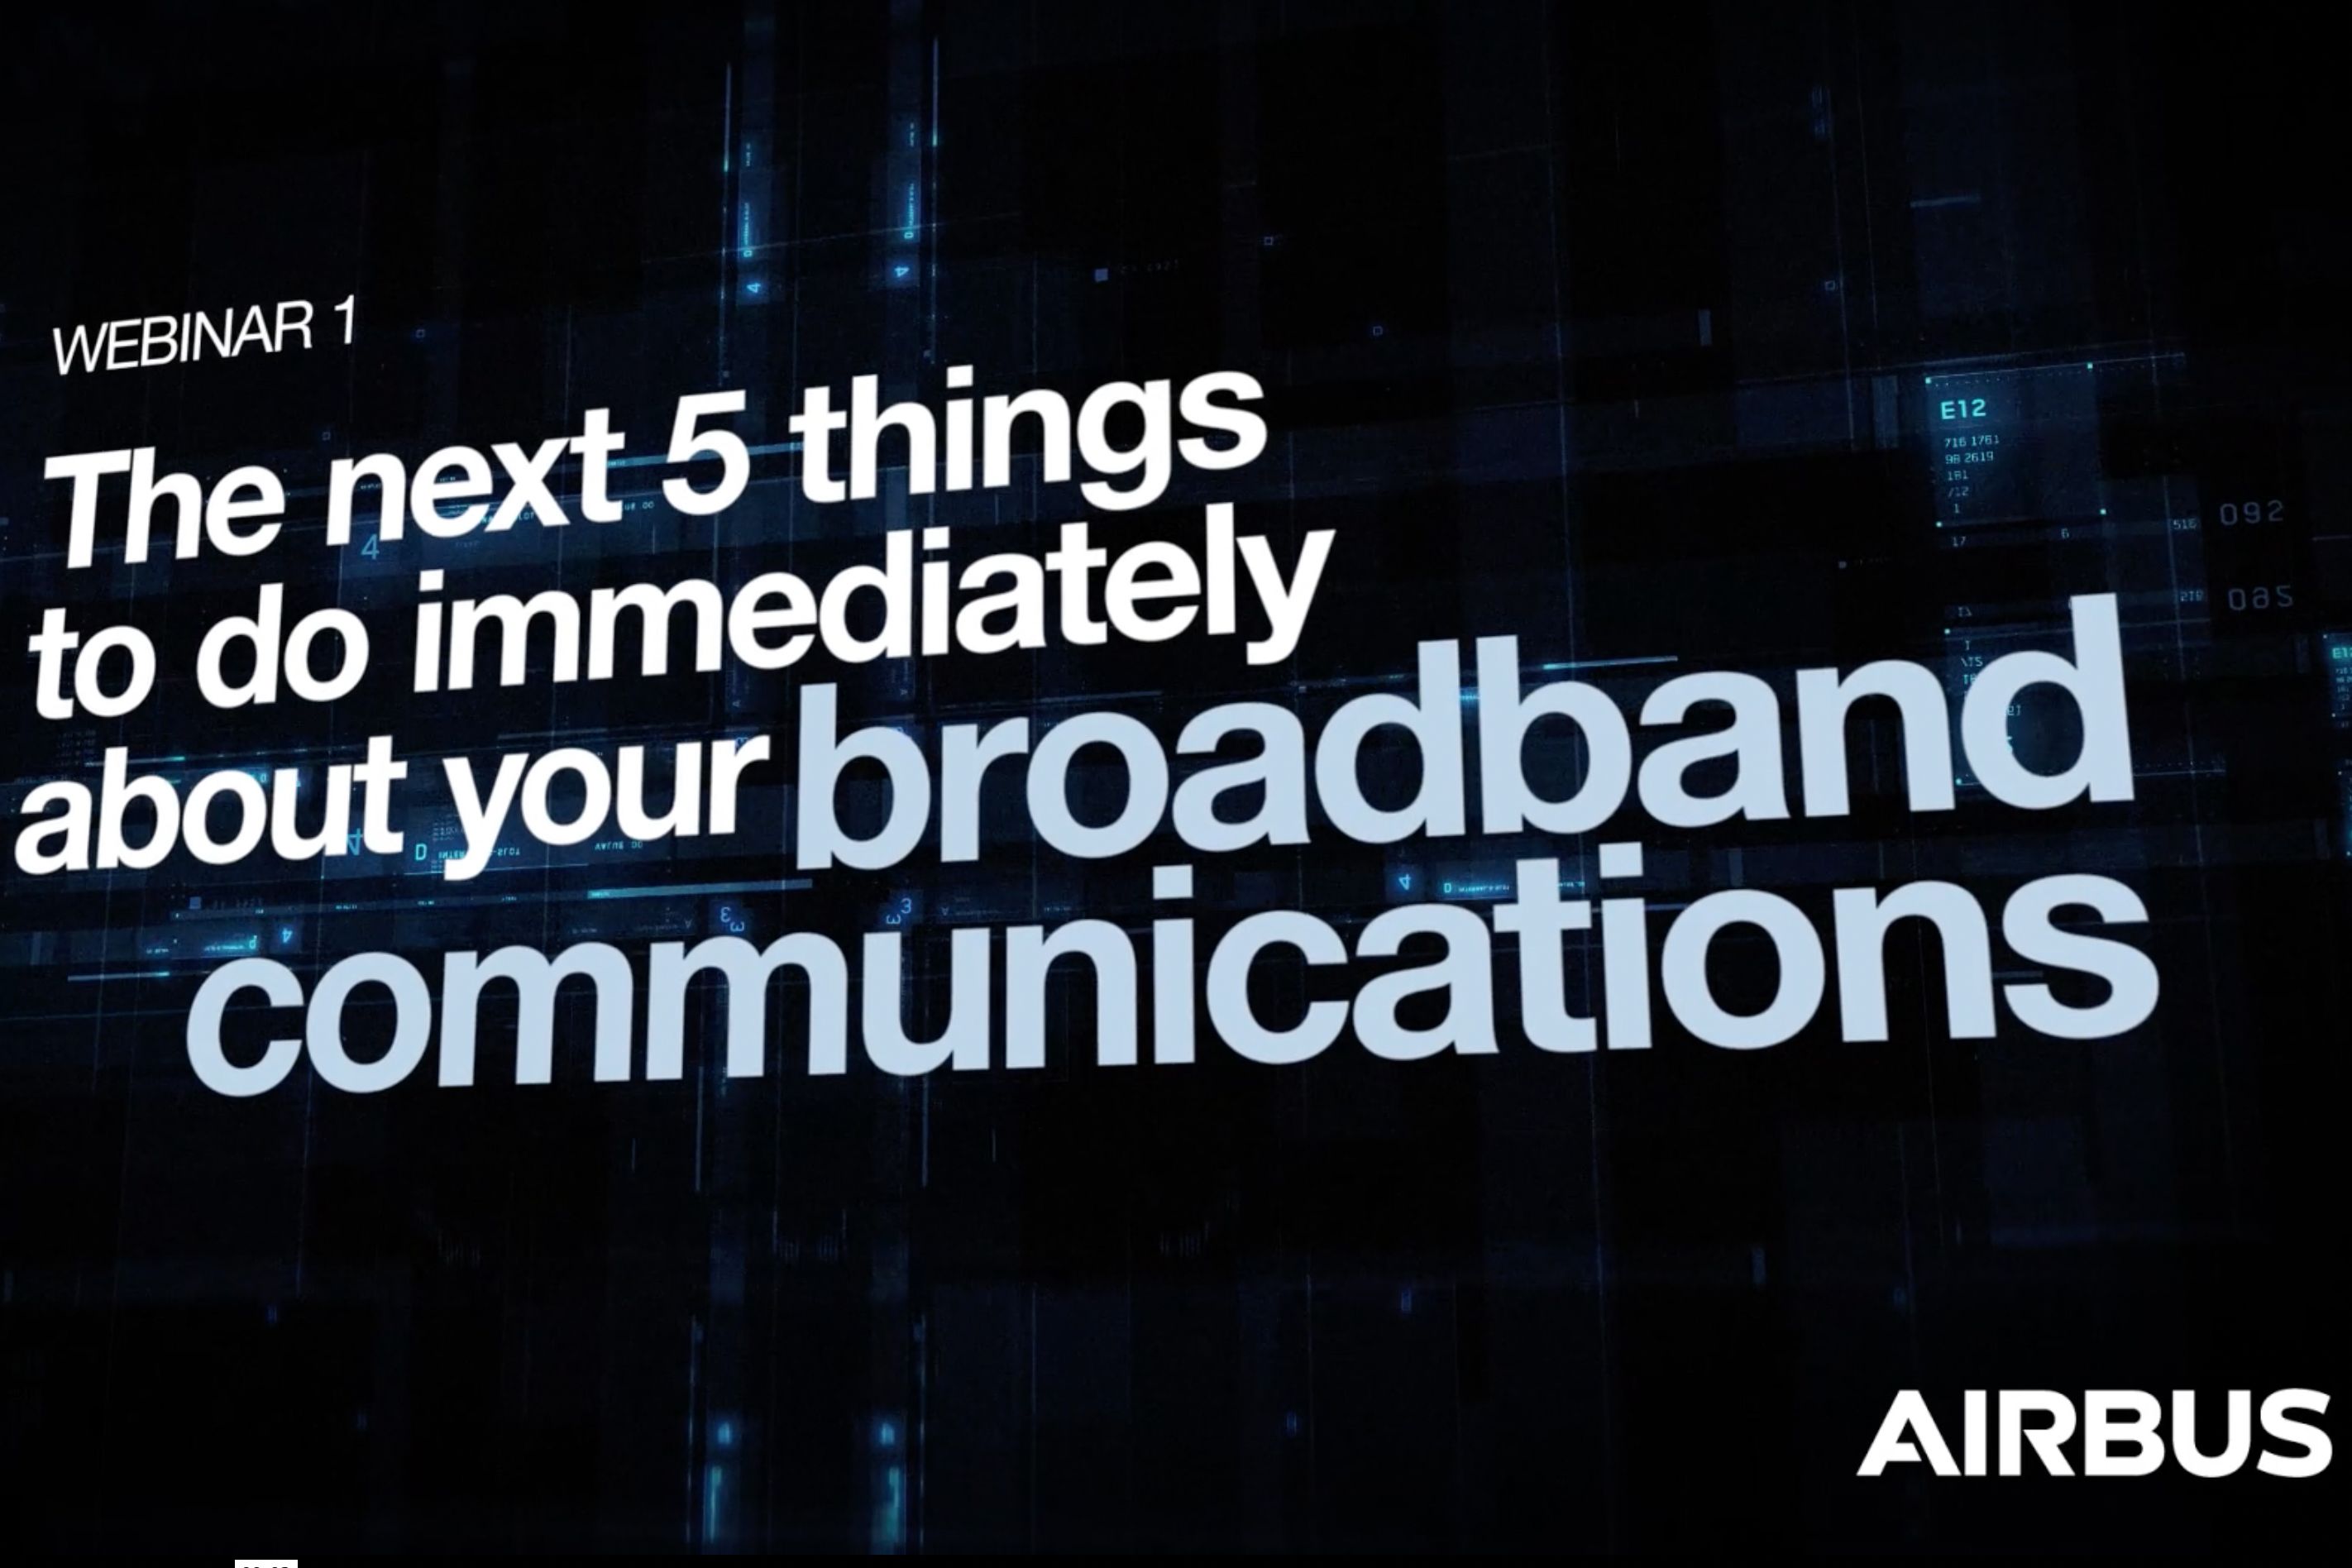 Webinar 1: The next 5 things to do immediately about your broadband communications